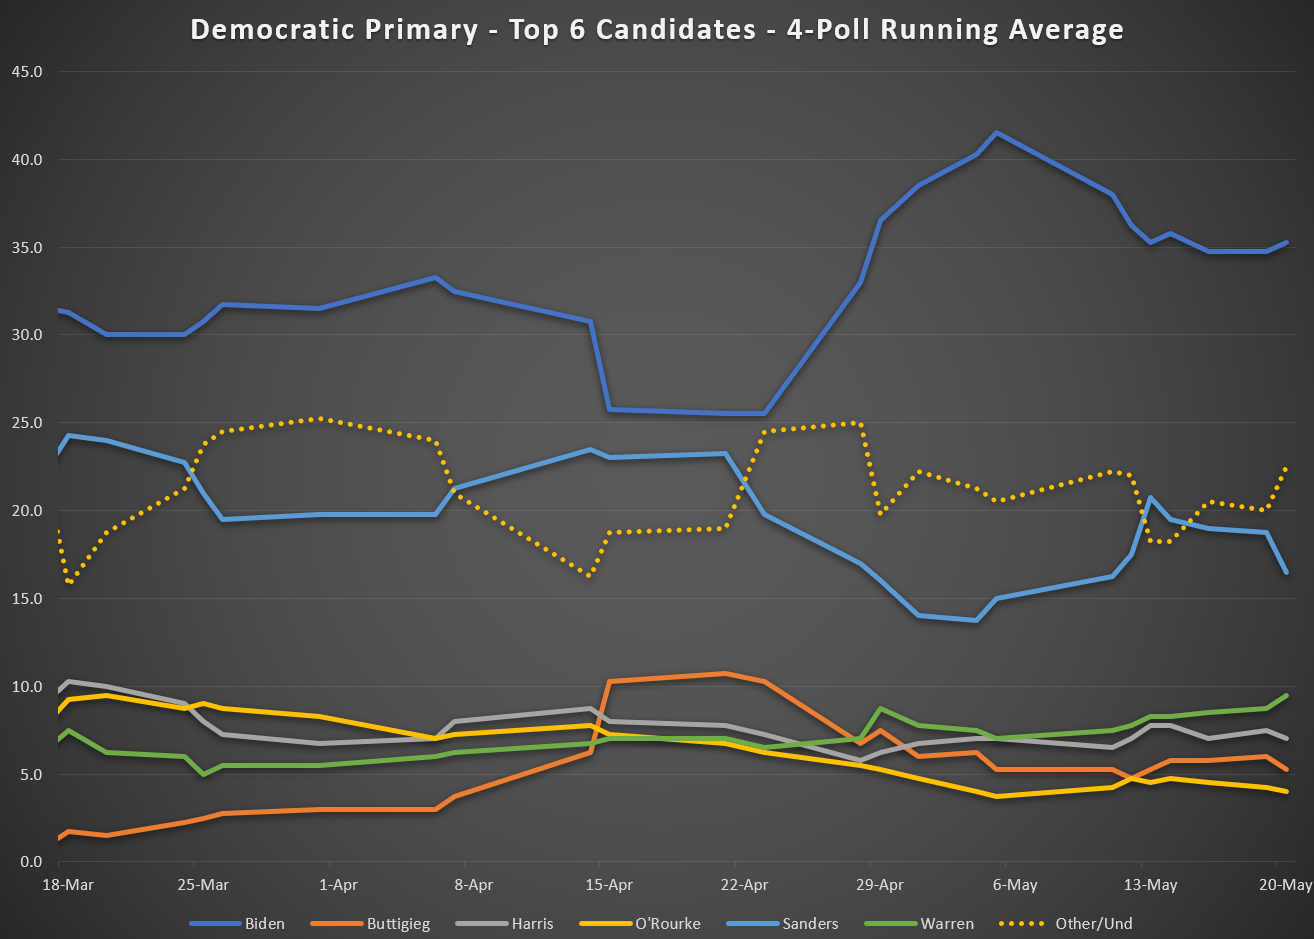 Democratic Primary - Top 6 Candidates - March-May 2019